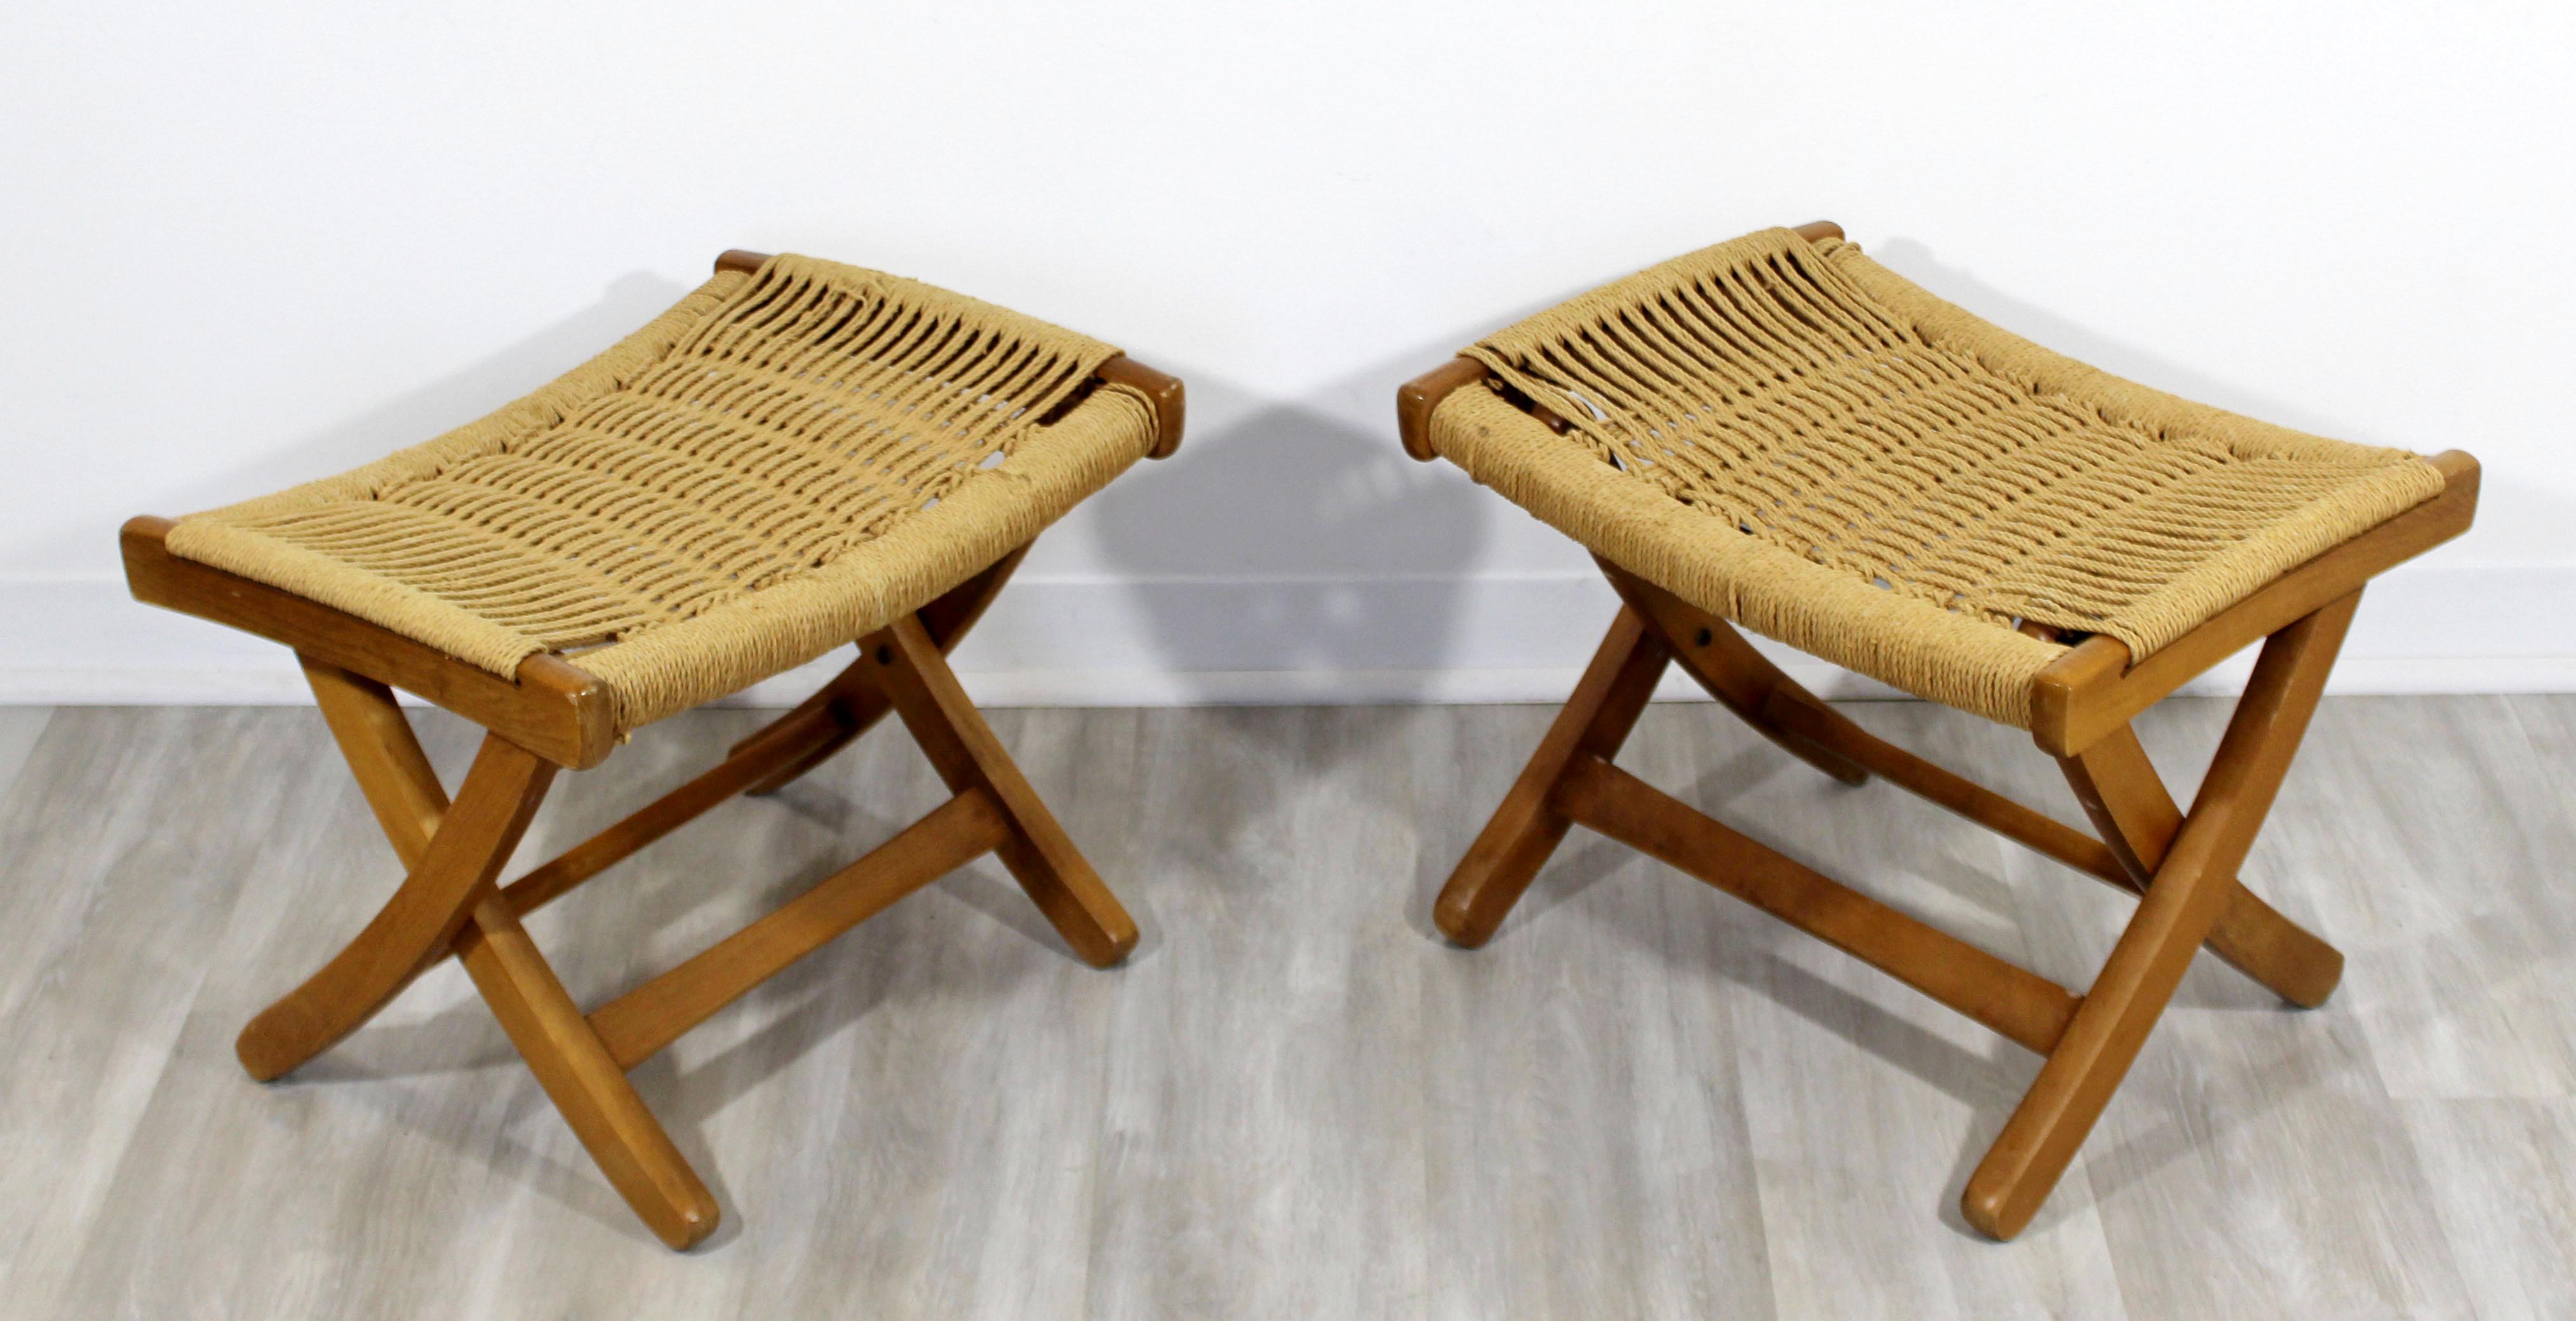 For your consideration is a wonderful pair of folding ottomans or bench seats, with rush cord, made in Yugoslavia, circa 1960s. In good vintage condition. The dimensions are 20